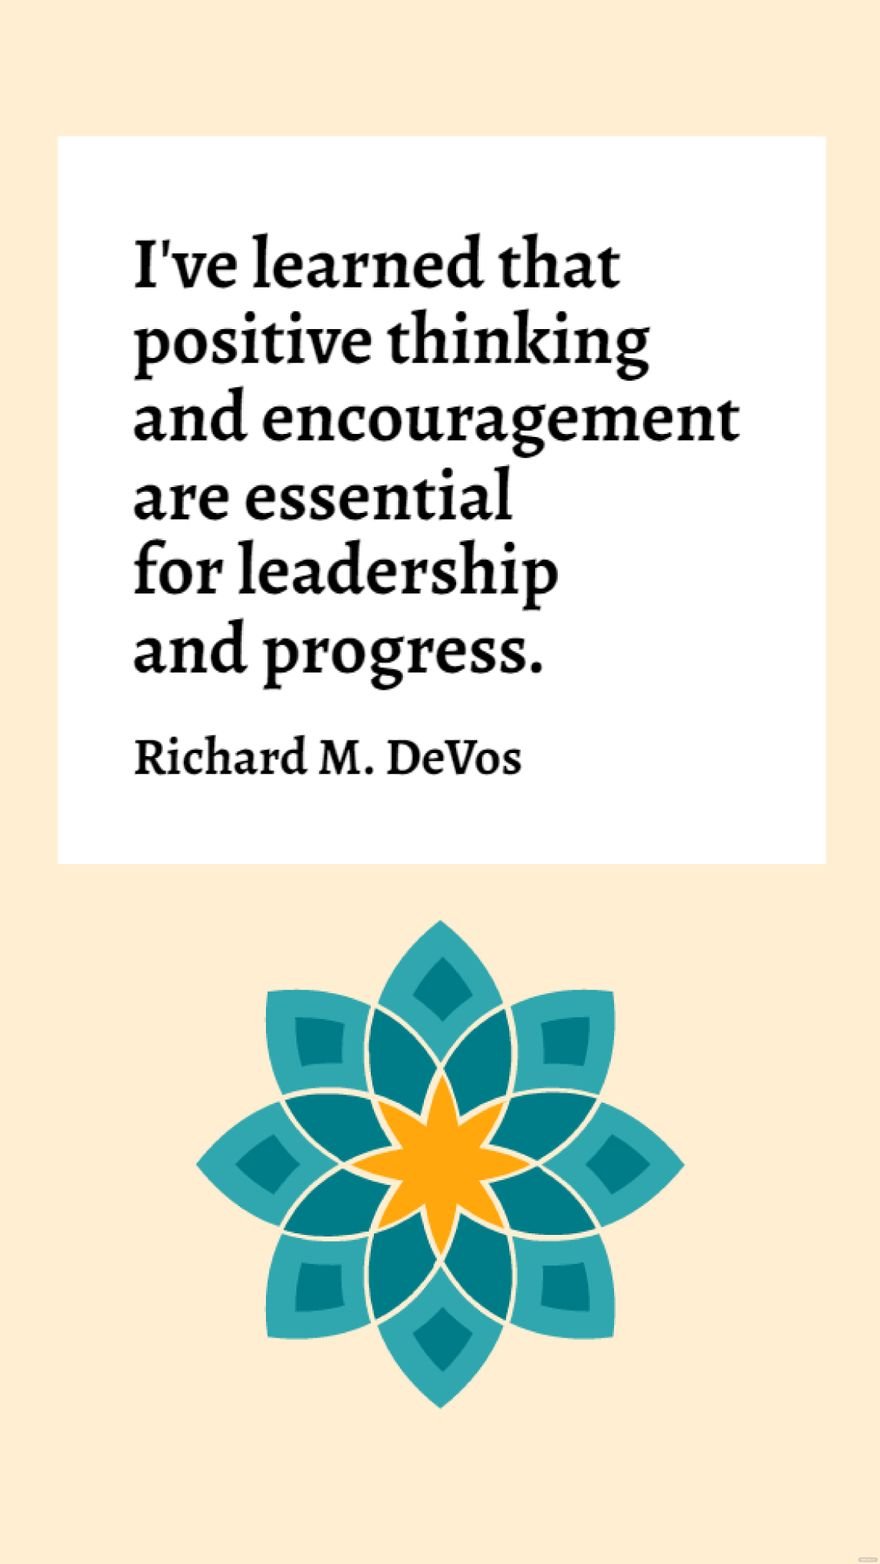 Richard M. DeVos - I've learned that positive thinking and encouragement are essential for leadership and progress.